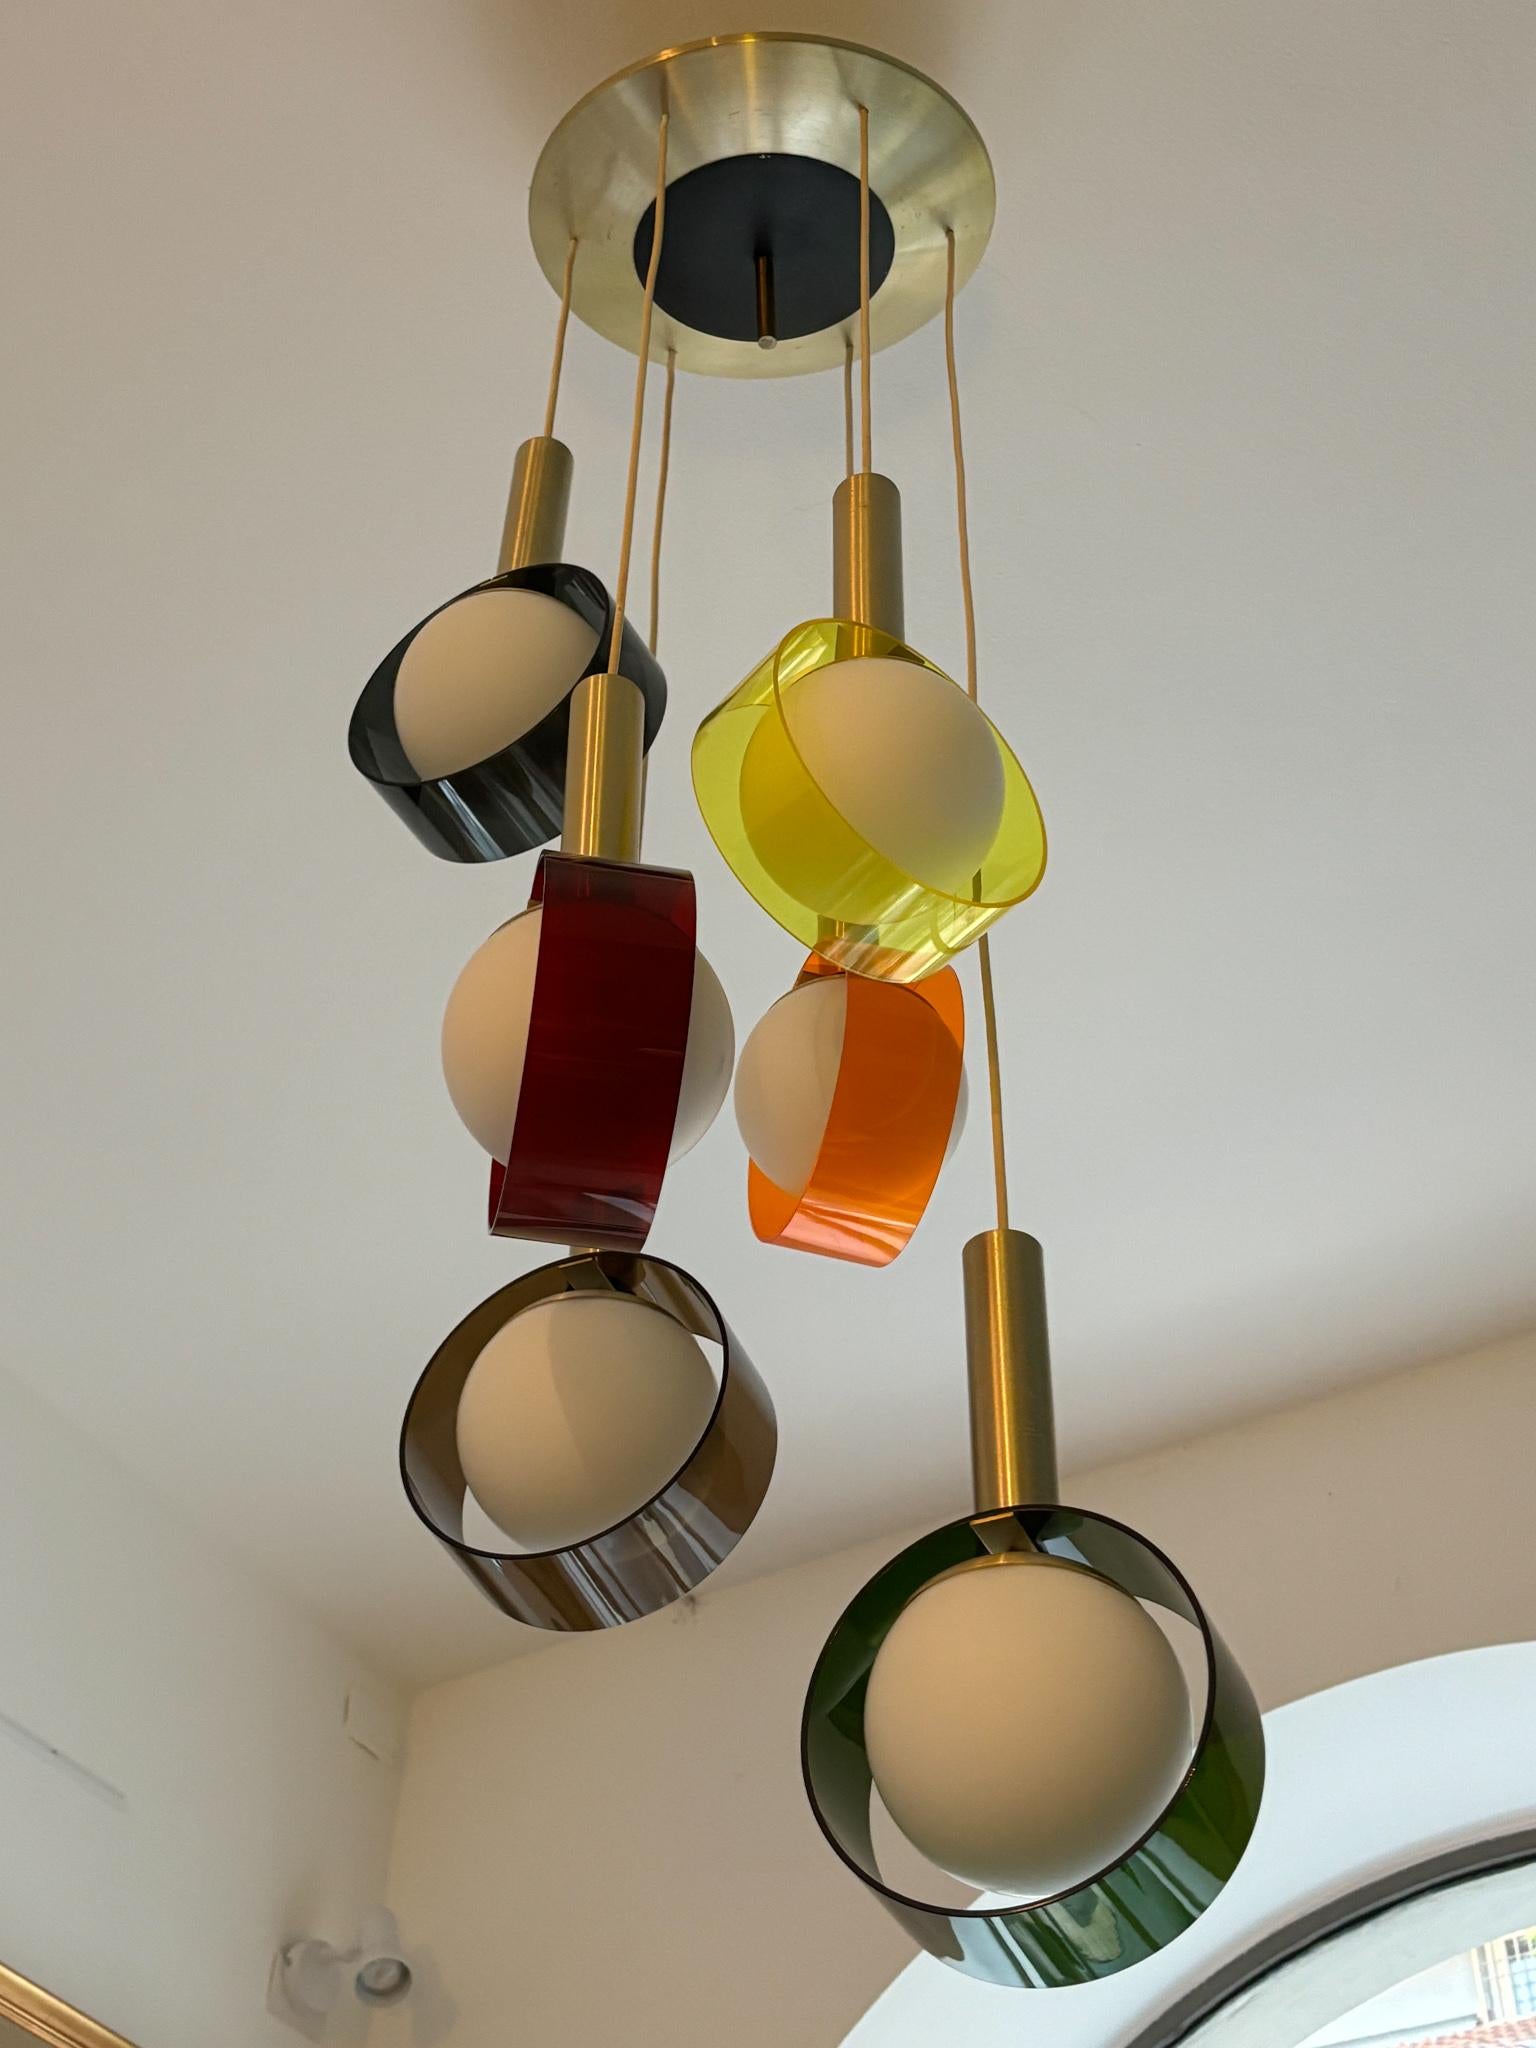 Multicolored Stilux pendant chandelier, made in the 1960s. Brushed anodized aluminium, painted aluminium, satin opal glass, perspex. The suspensions are easily adjustable via knot.

Diffusers -  h 38 cm

Stilux Milano was an innovative lighting